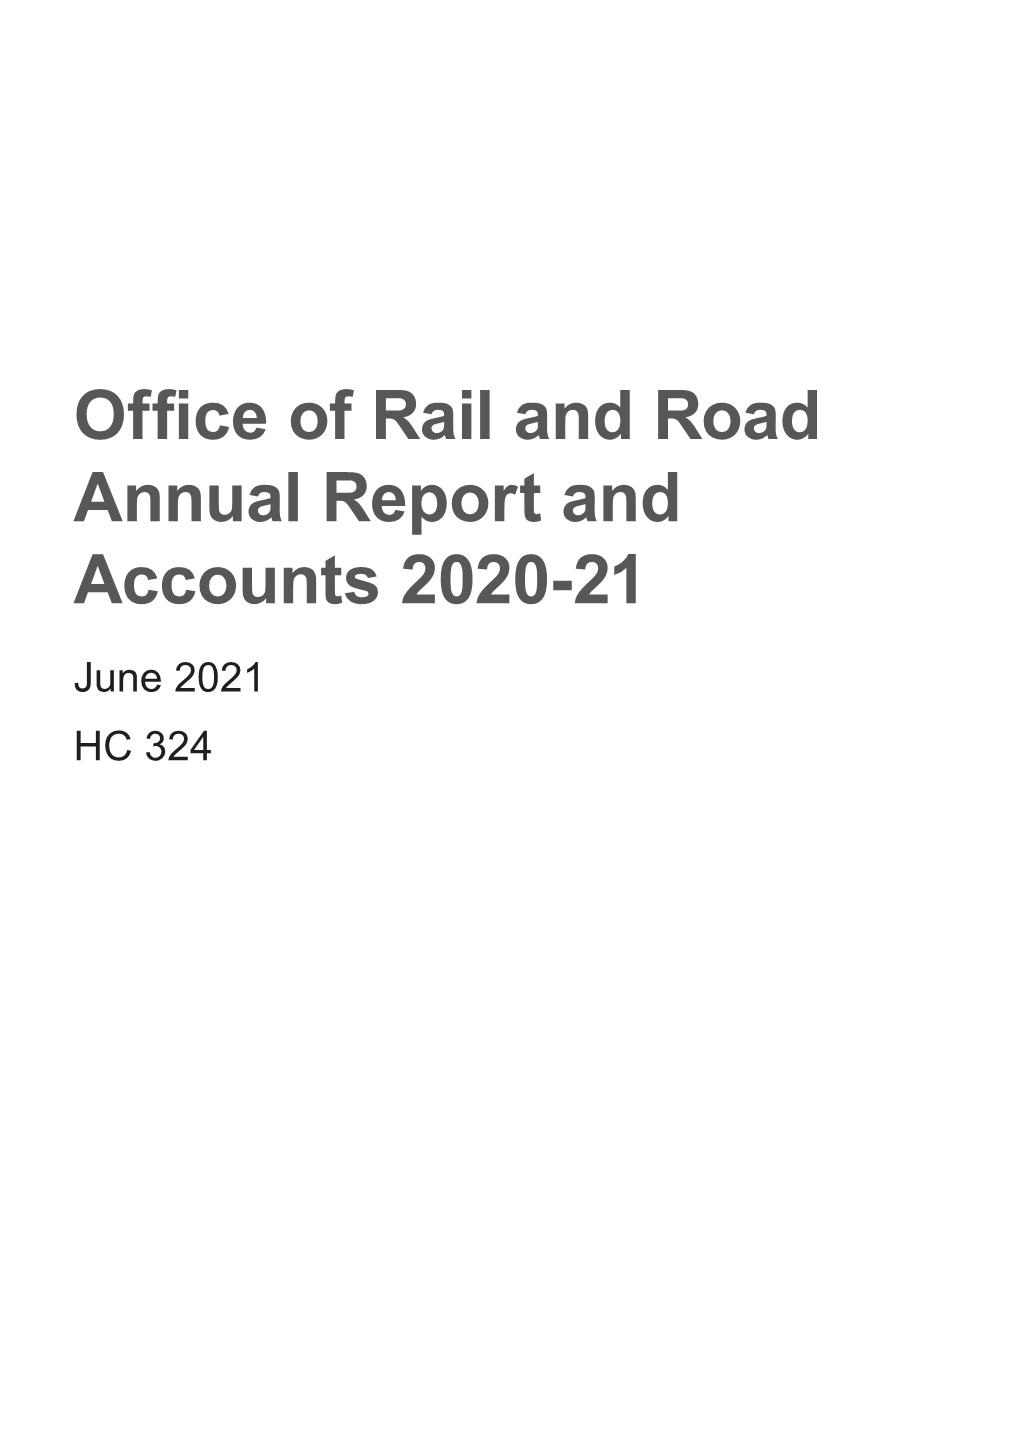 Office of Rail and Road Annual Report and Accounts 2020-21 June 2021 HC 324